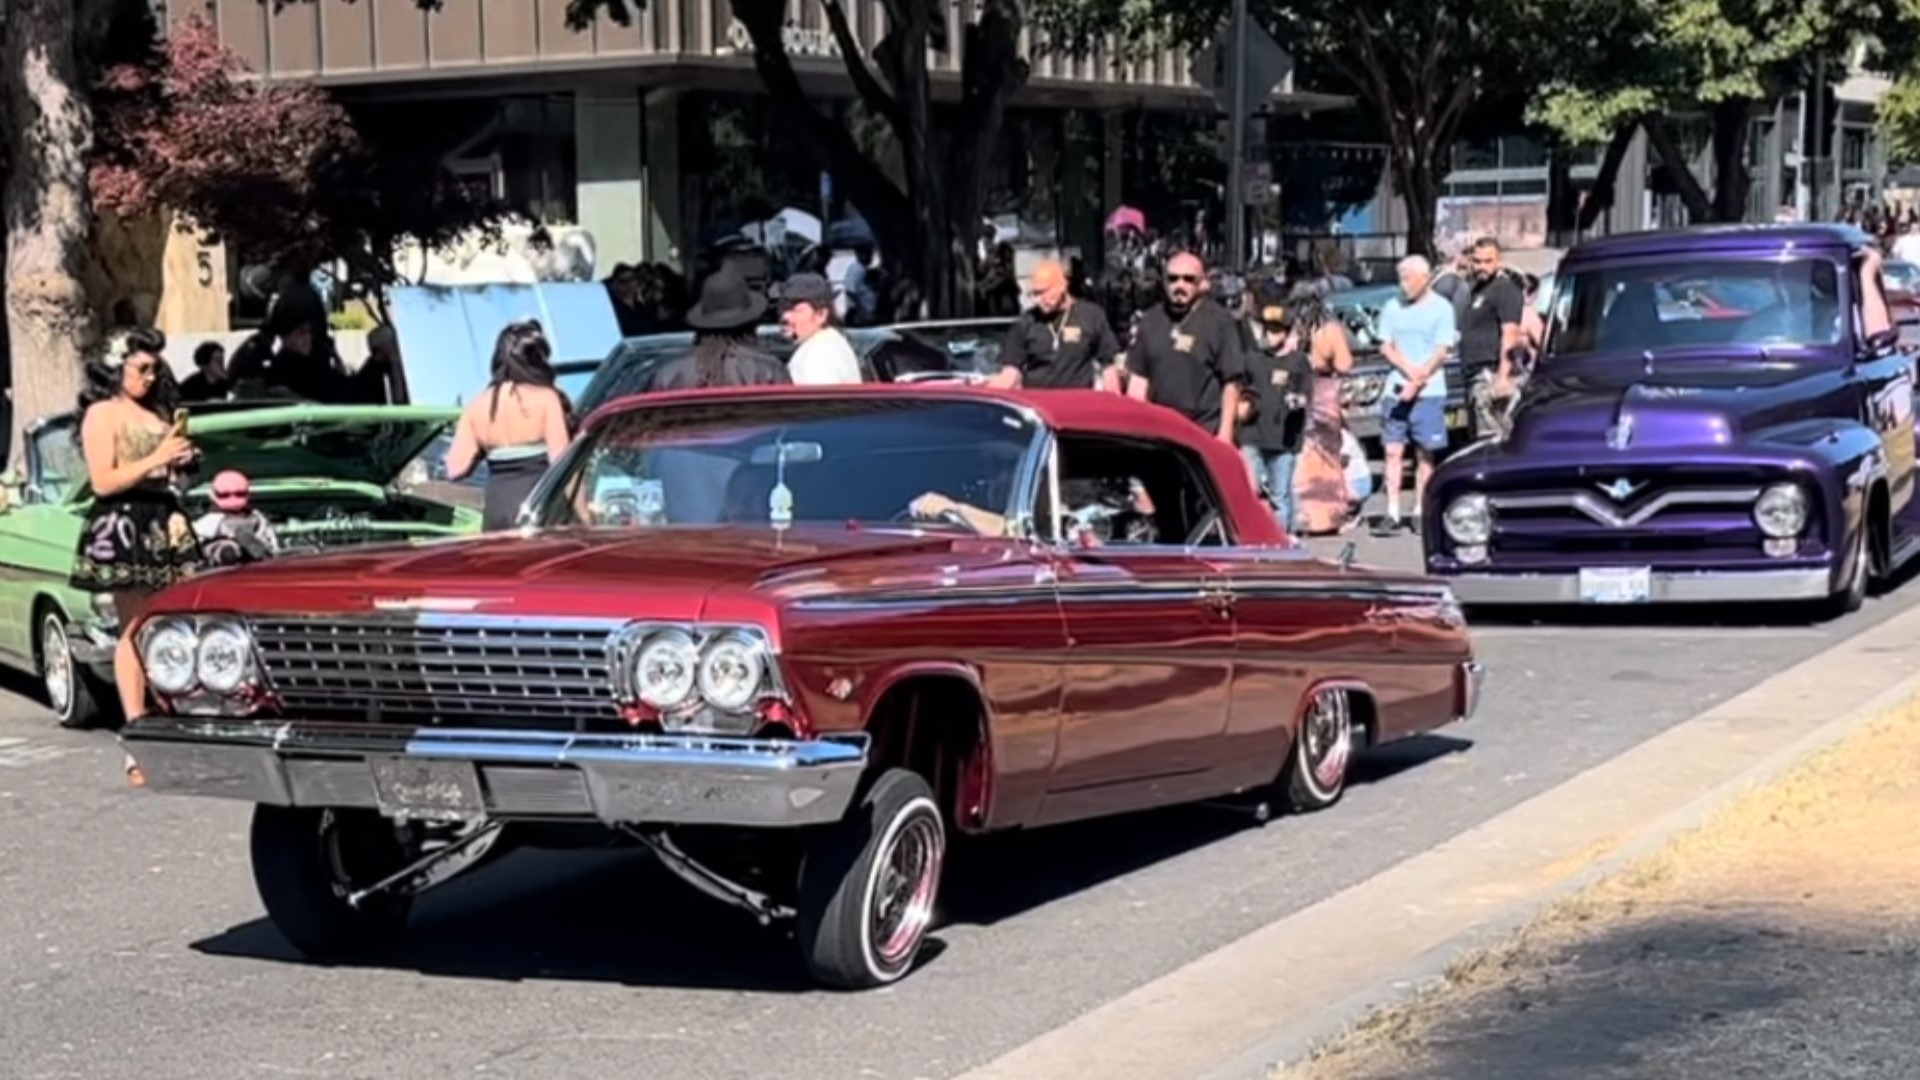 104 cars came to Sacramento from 16 different California counties to celebrate the Inaugural California Lowrider Holiday Celebration.